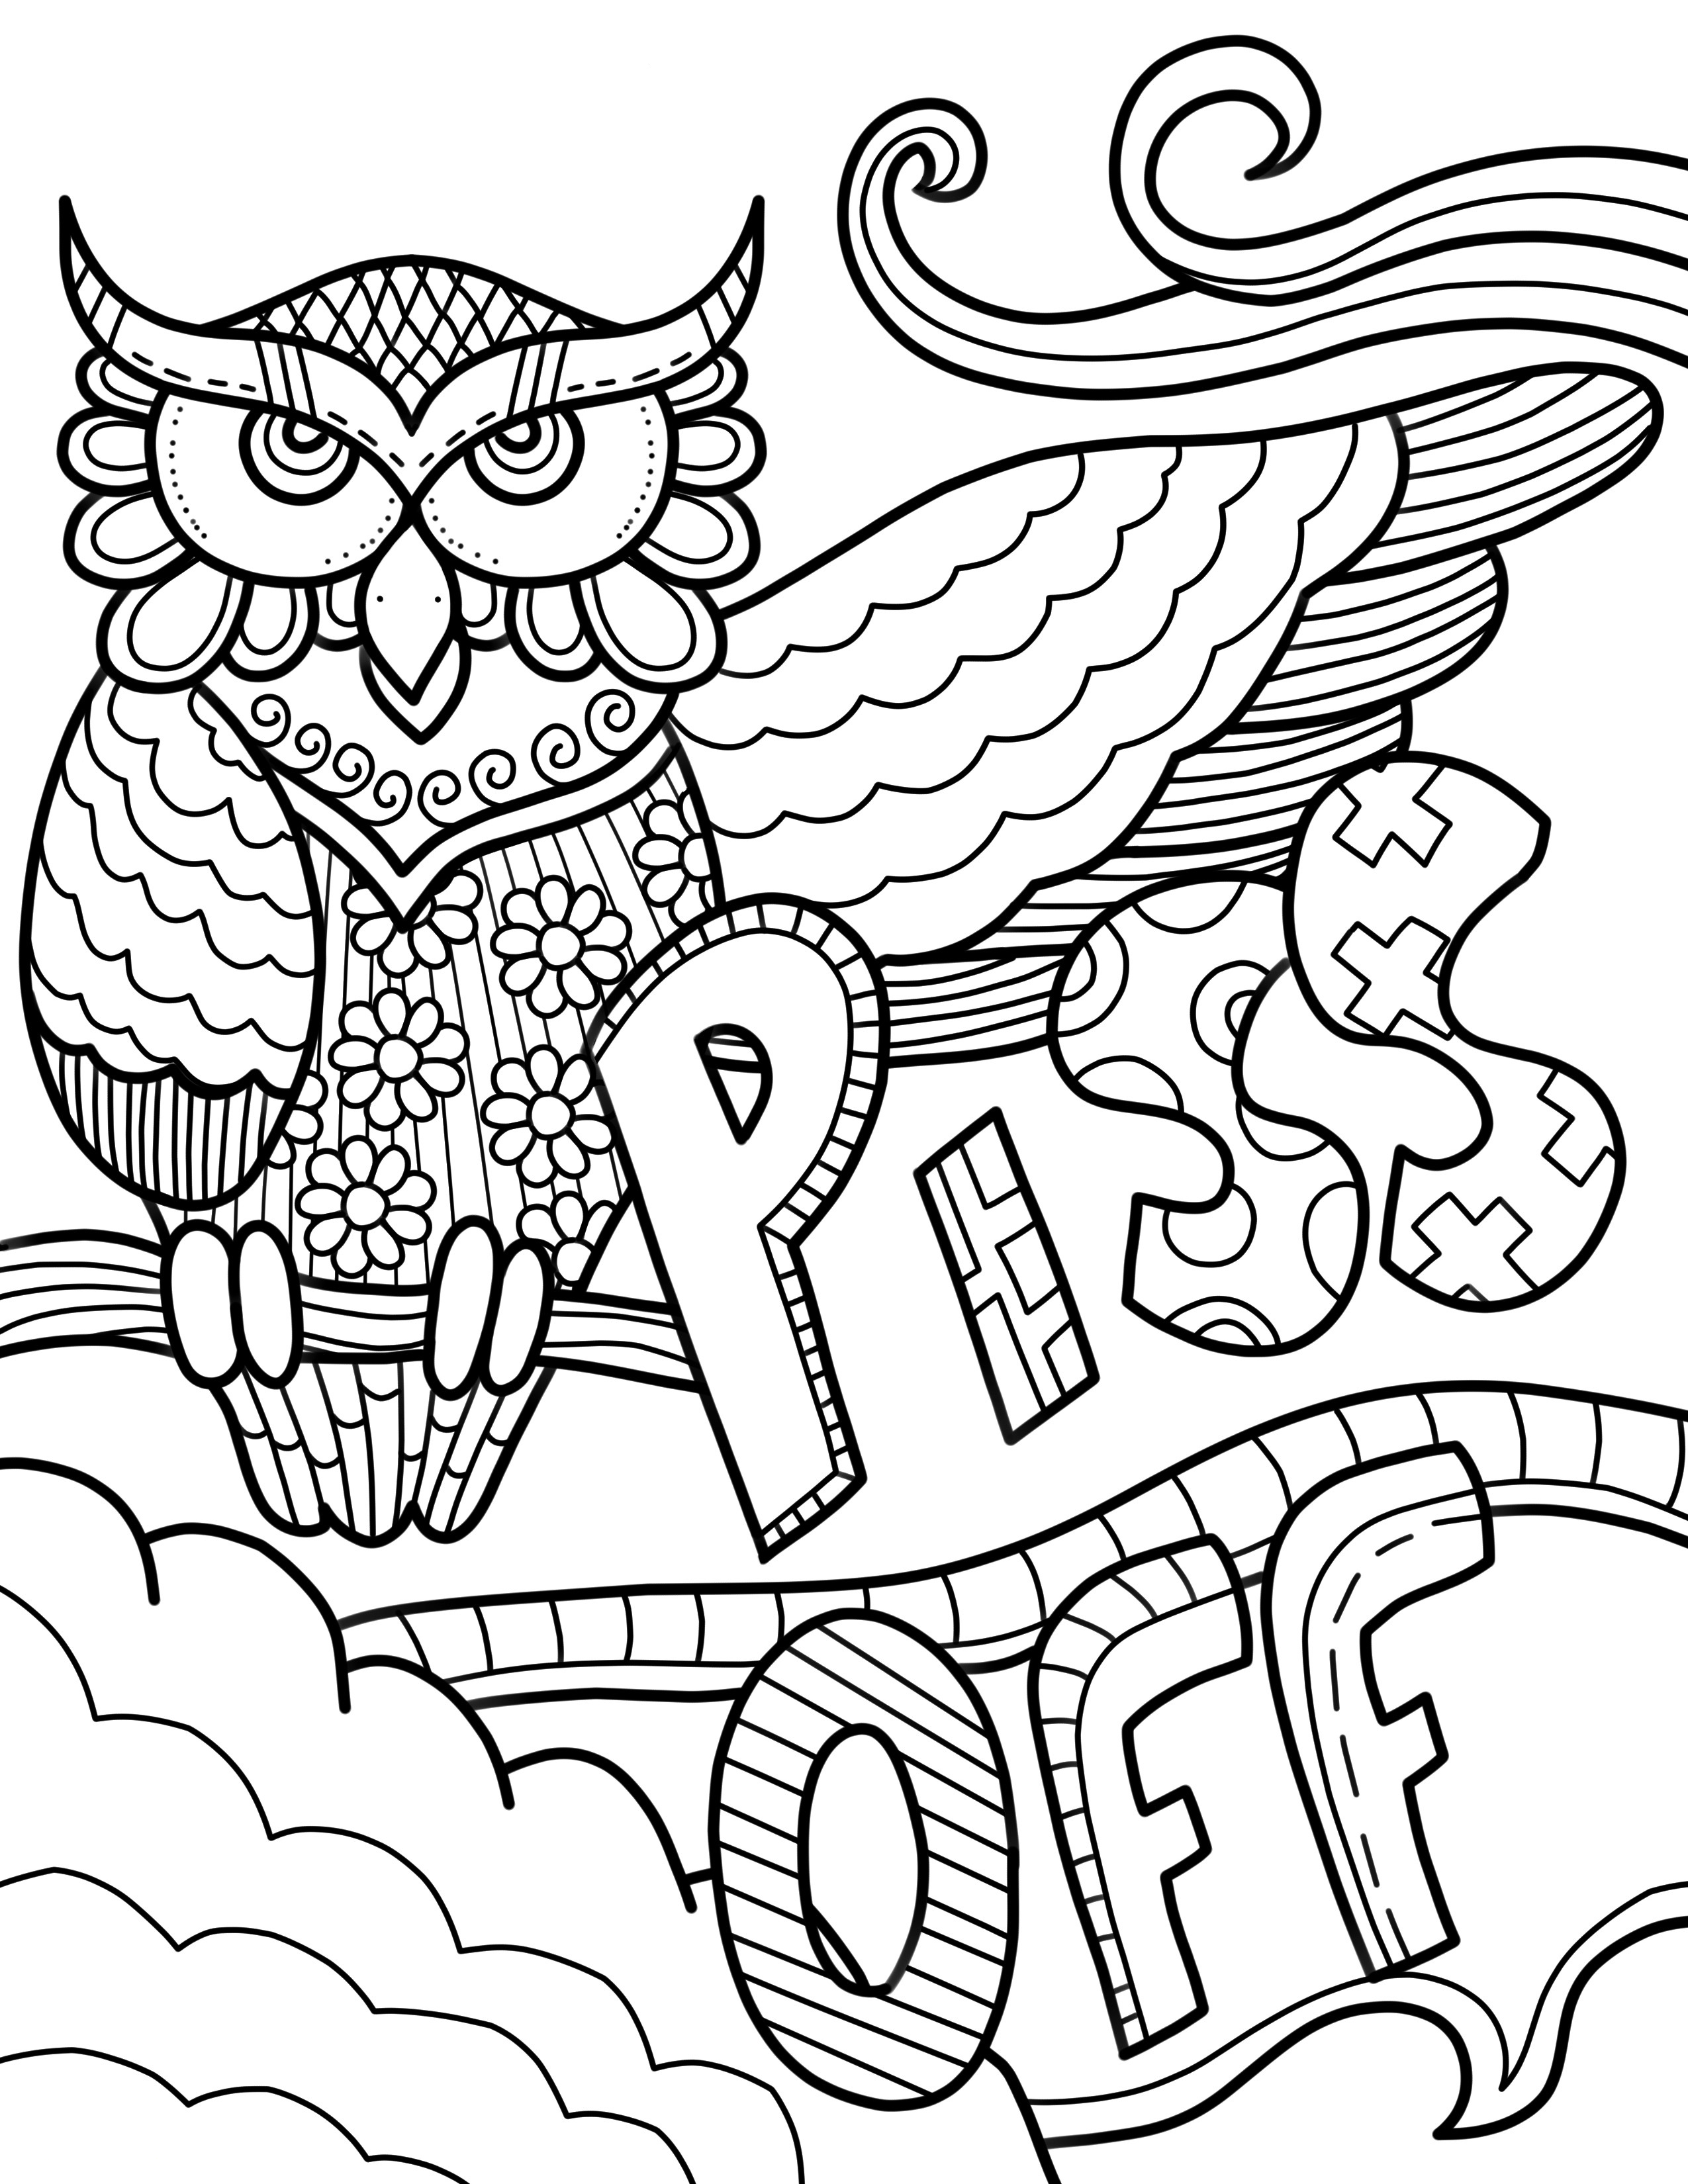 Swear Word Free Printable Coloring Pages For Adults Pdf